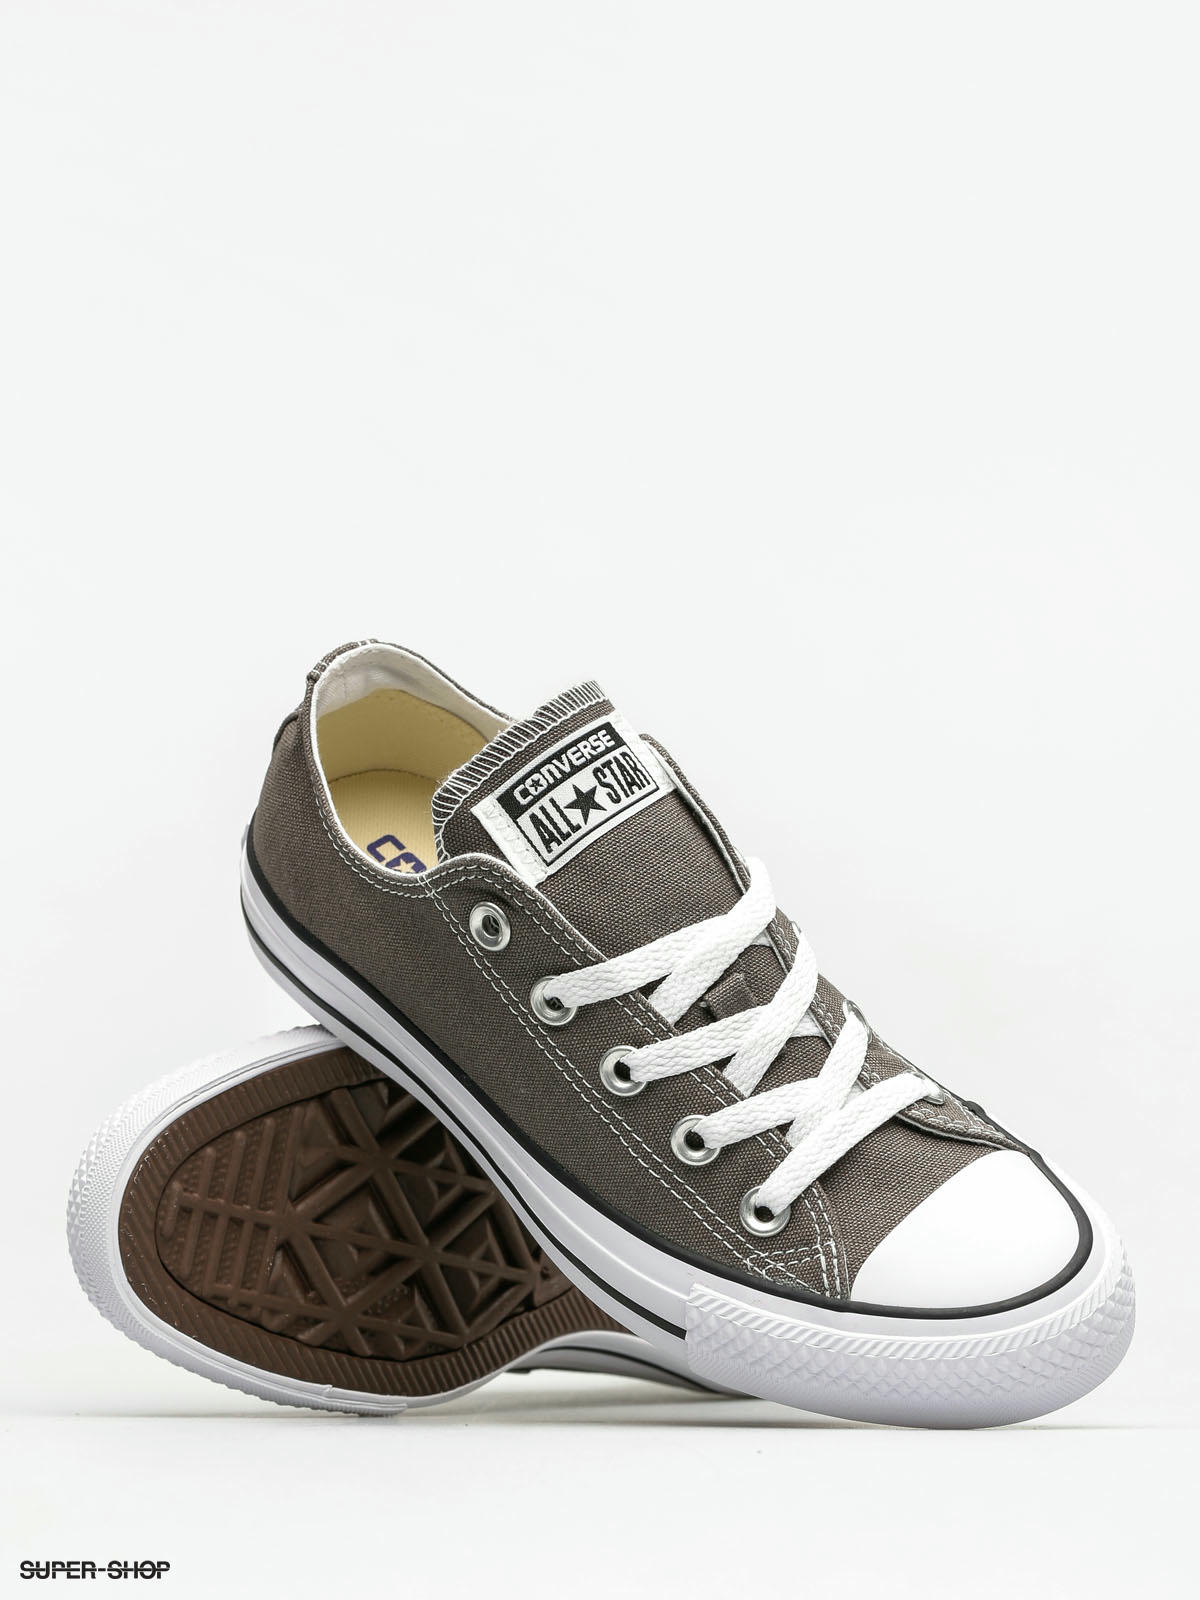 chuck taylor all star ox charcoal